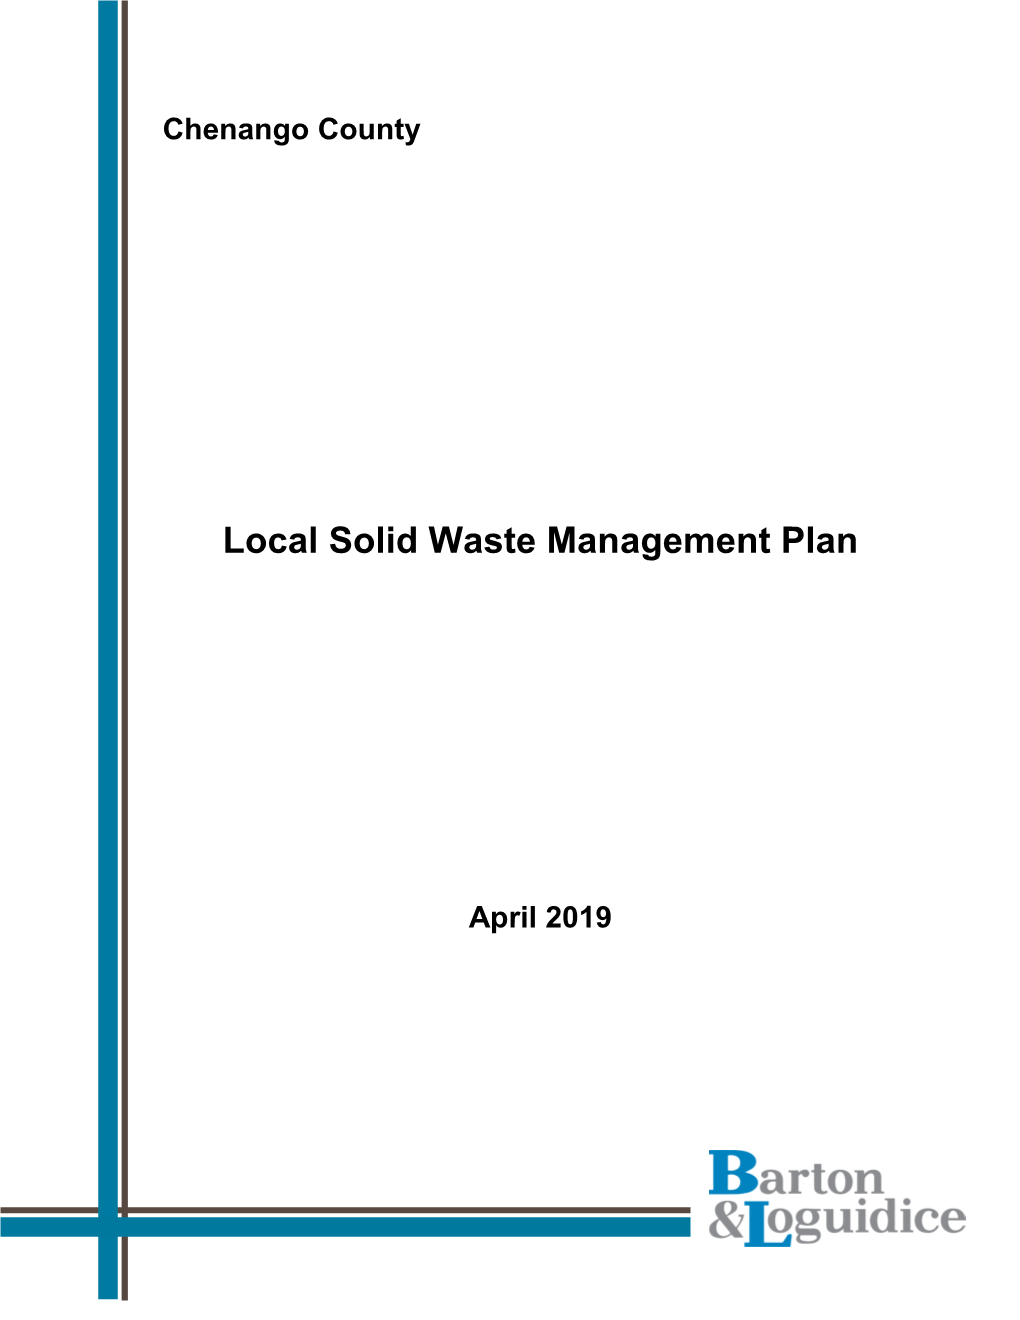 Chenango County Local Solid Waste Management Plan